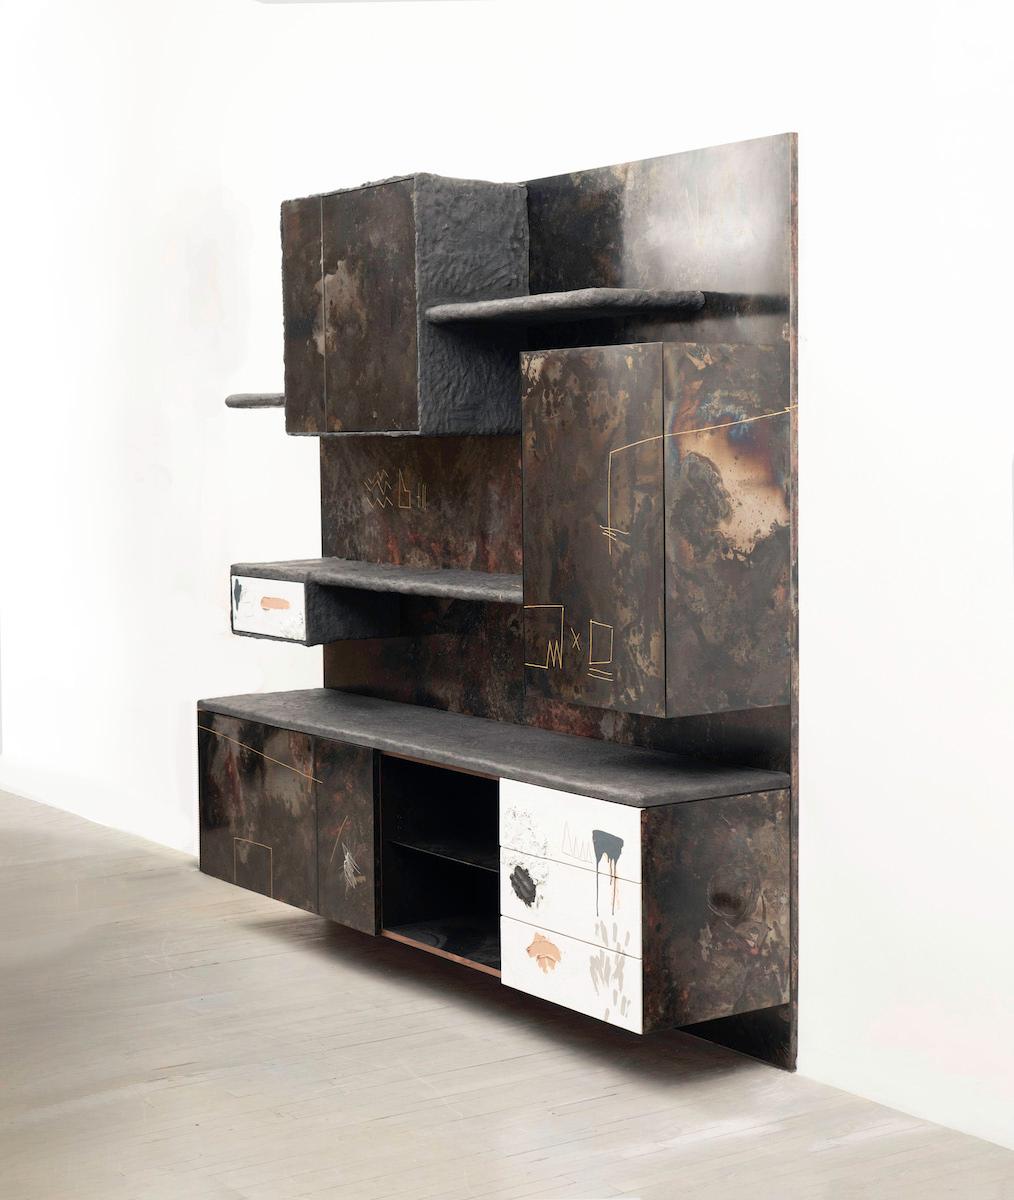 Stefan Rurak’s encompassing wall unit typifies his unique approach to design. Designed as a fully integrated work, the wall is a flexible design, suitable as a bar, a dining room server, for the bedroom or office, or as an engaging focal point for